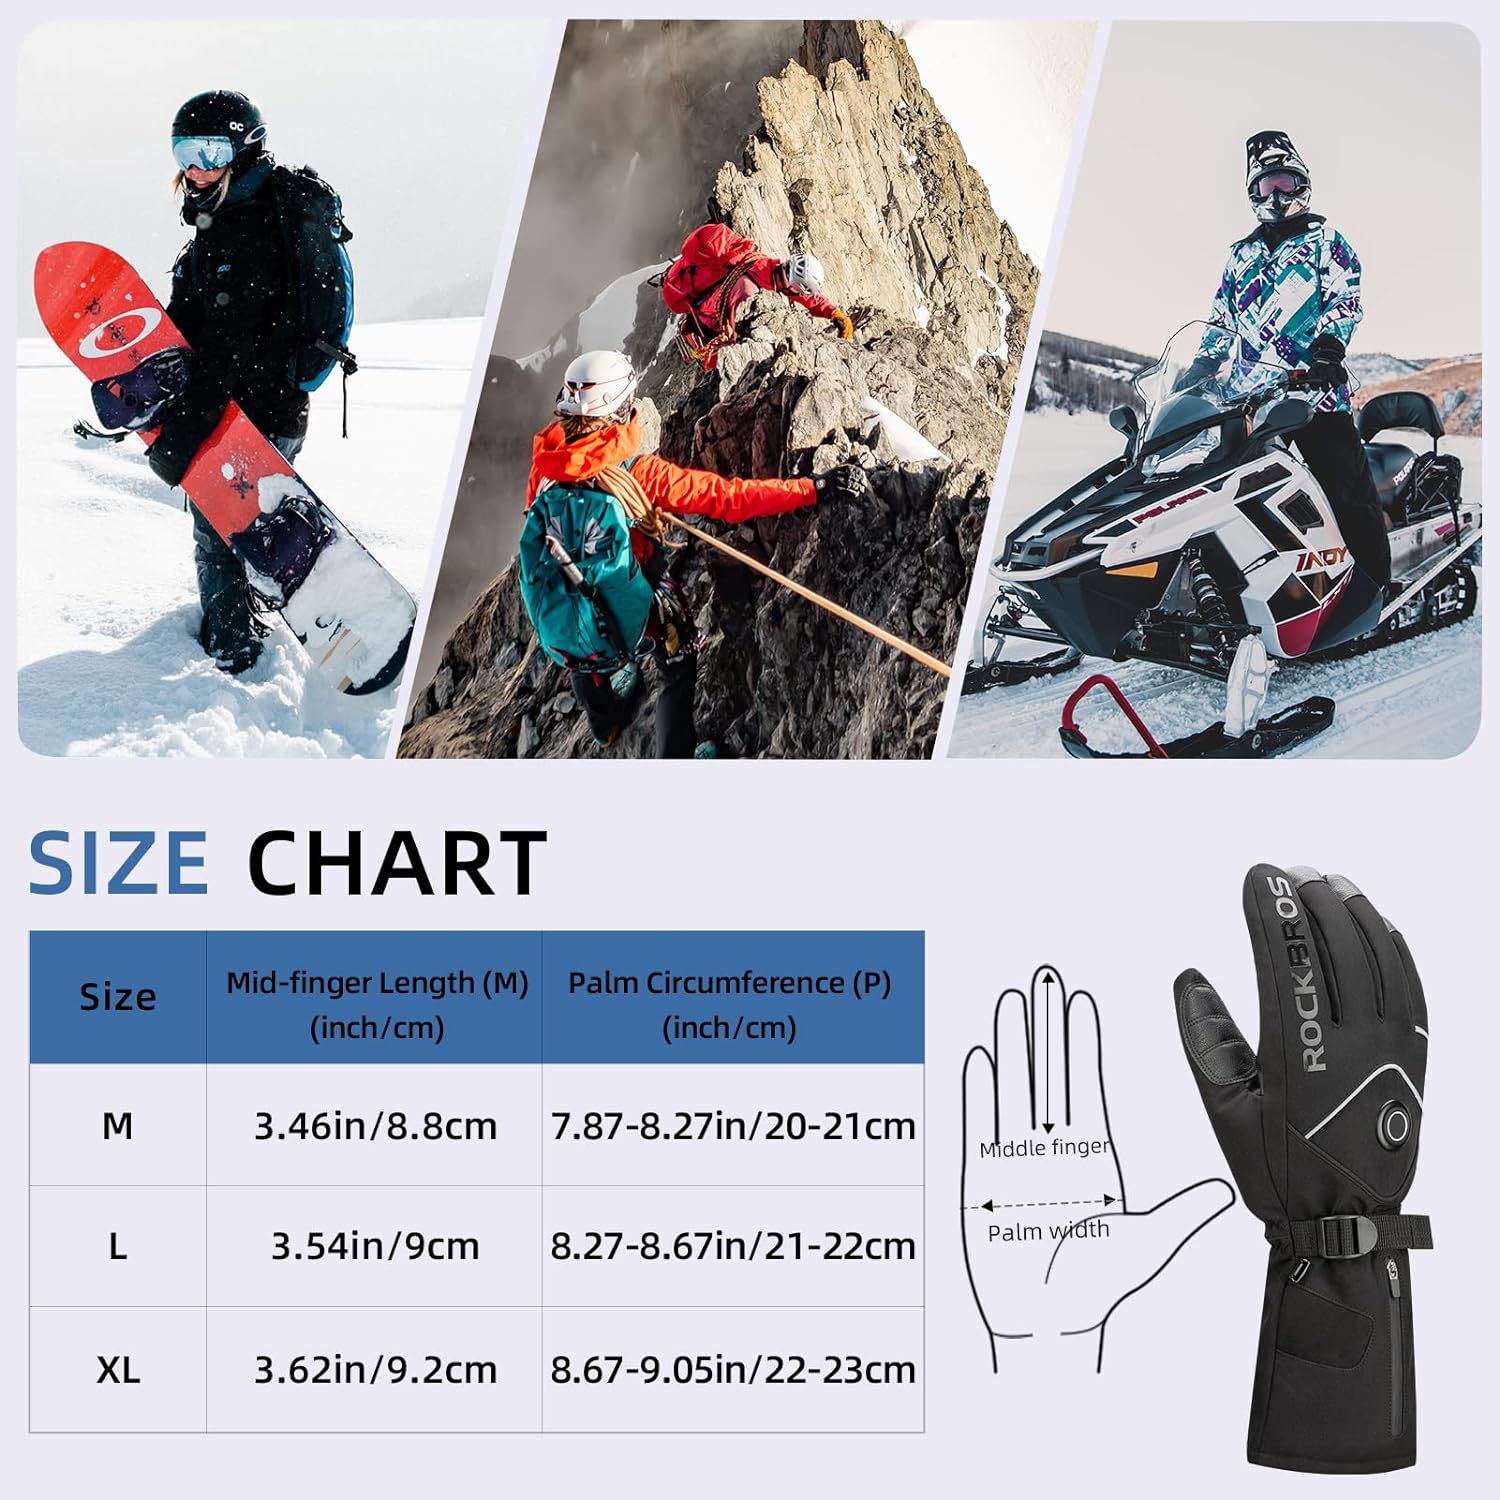 ROCKBROS Heated Gloves Electric Rechargeable Battery Thermal Mittens Gloves for Men Women Winter Touchscreen Waterproof Warm Glove Liners Cold Weather Gloves for Cycling, Skiing, Snowboarding, Black, X-Large